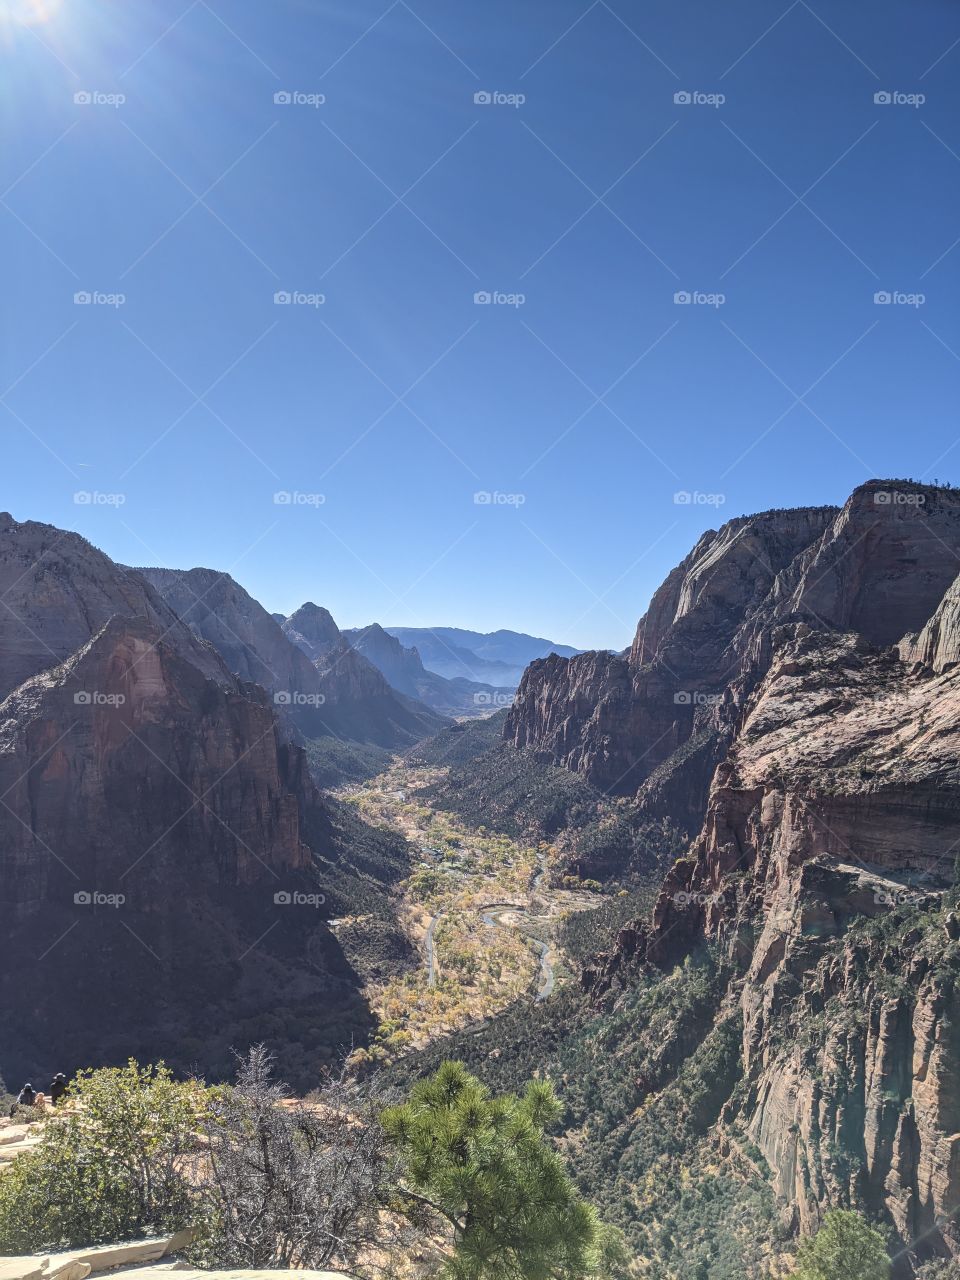 The View from Angels Landing in Zion National Park